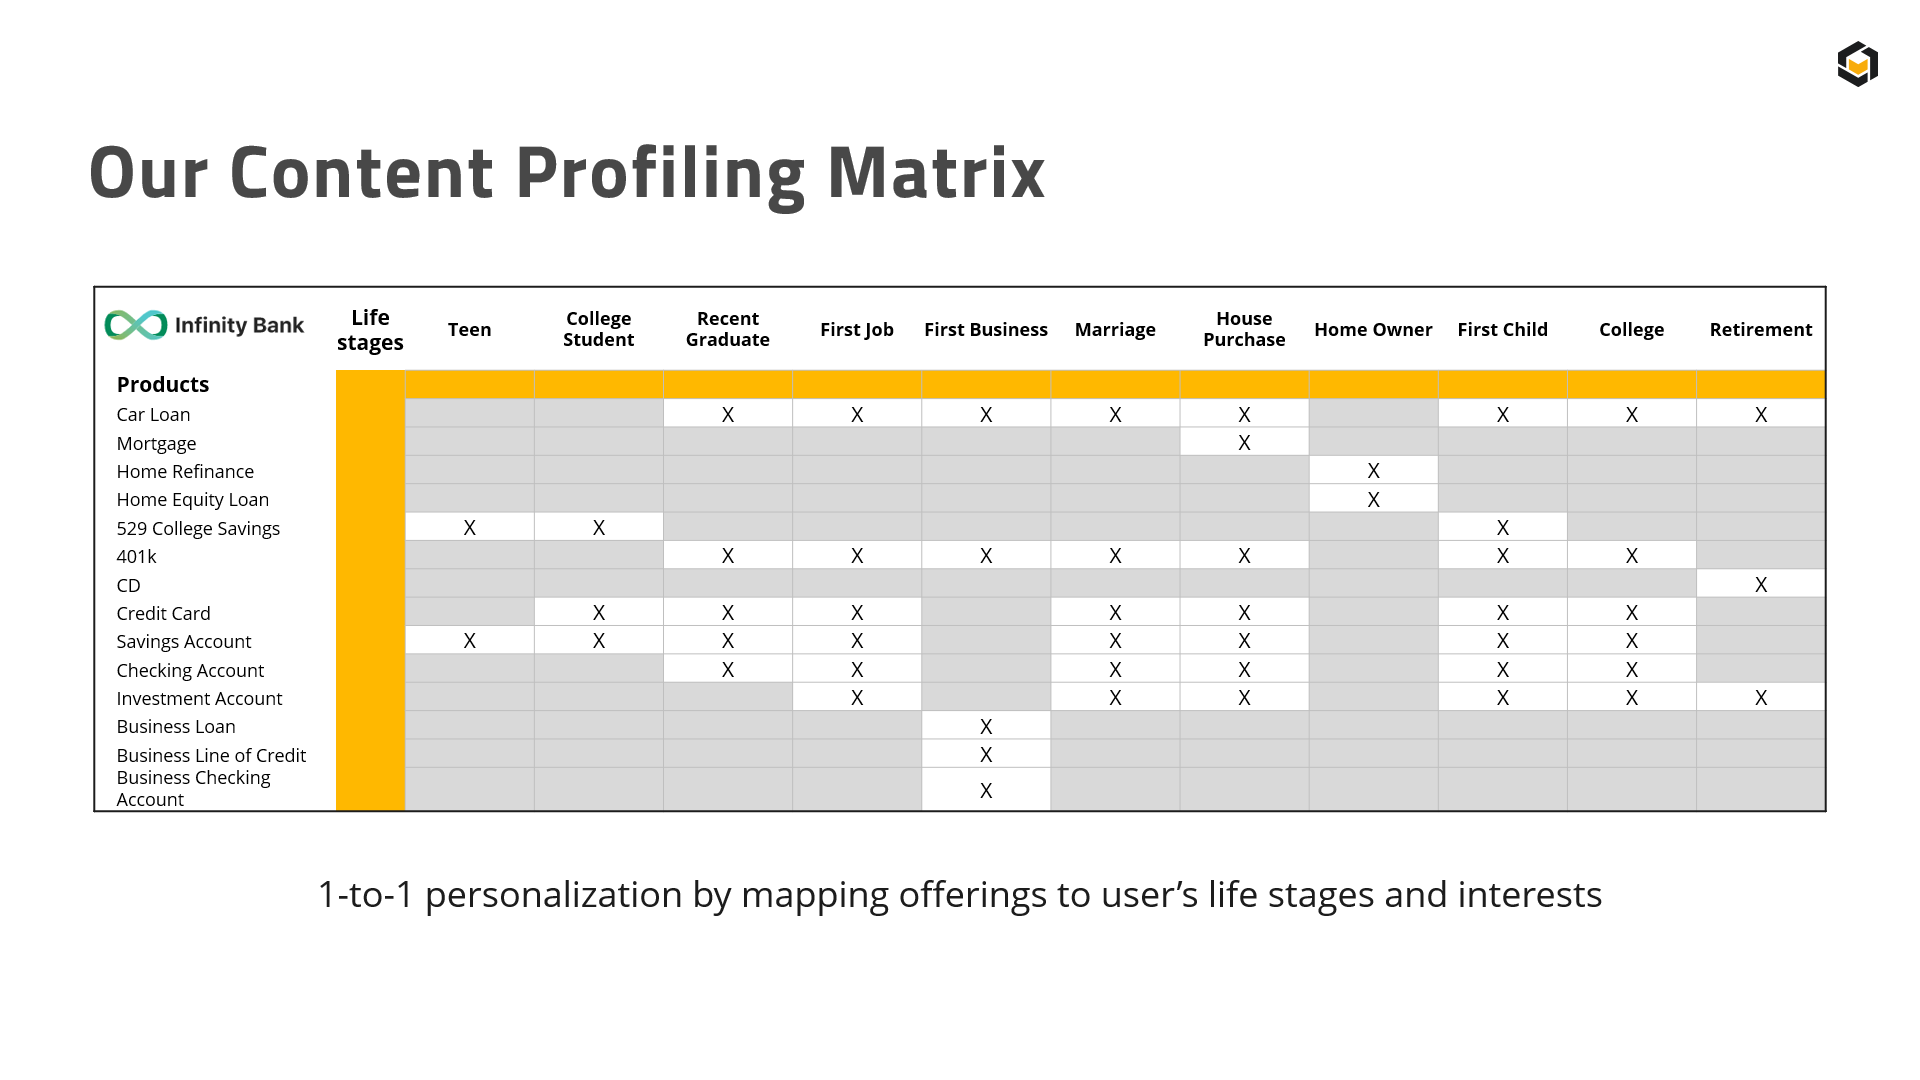  one-to-one personalization and mapping